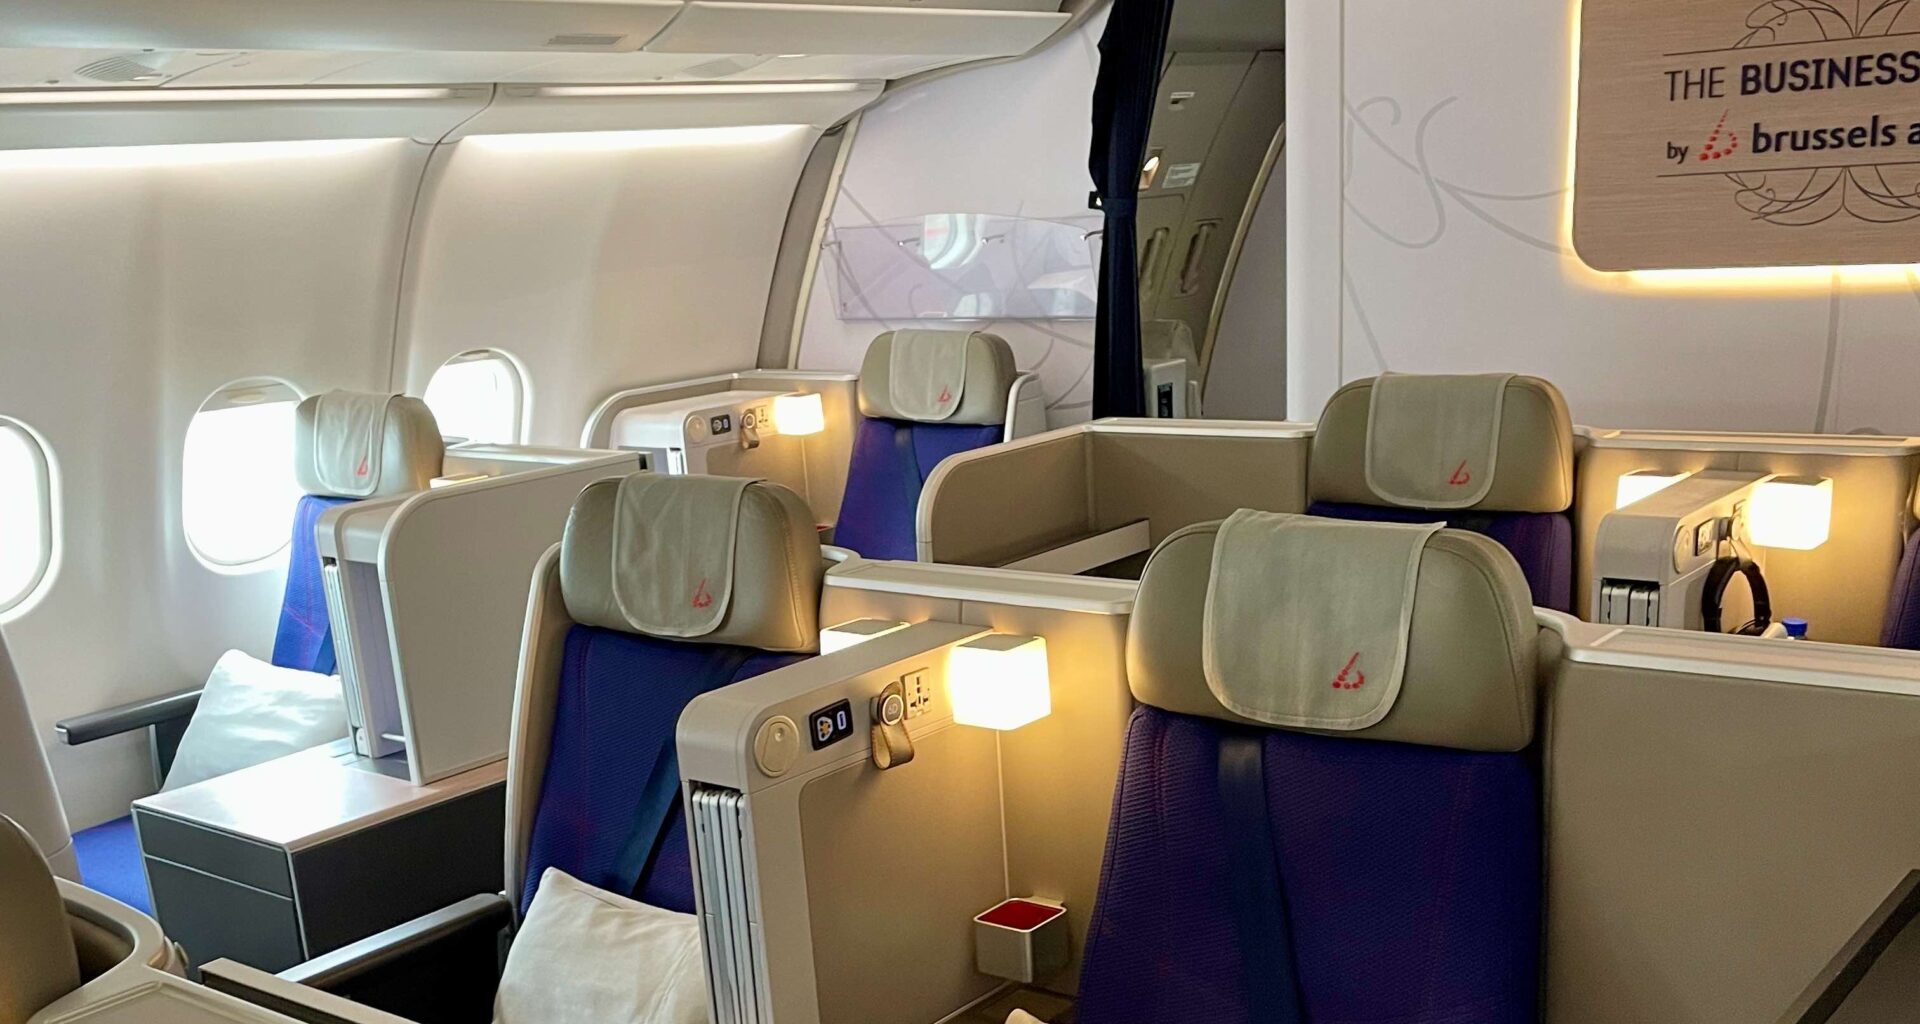 Brussels Airlines business class cabin